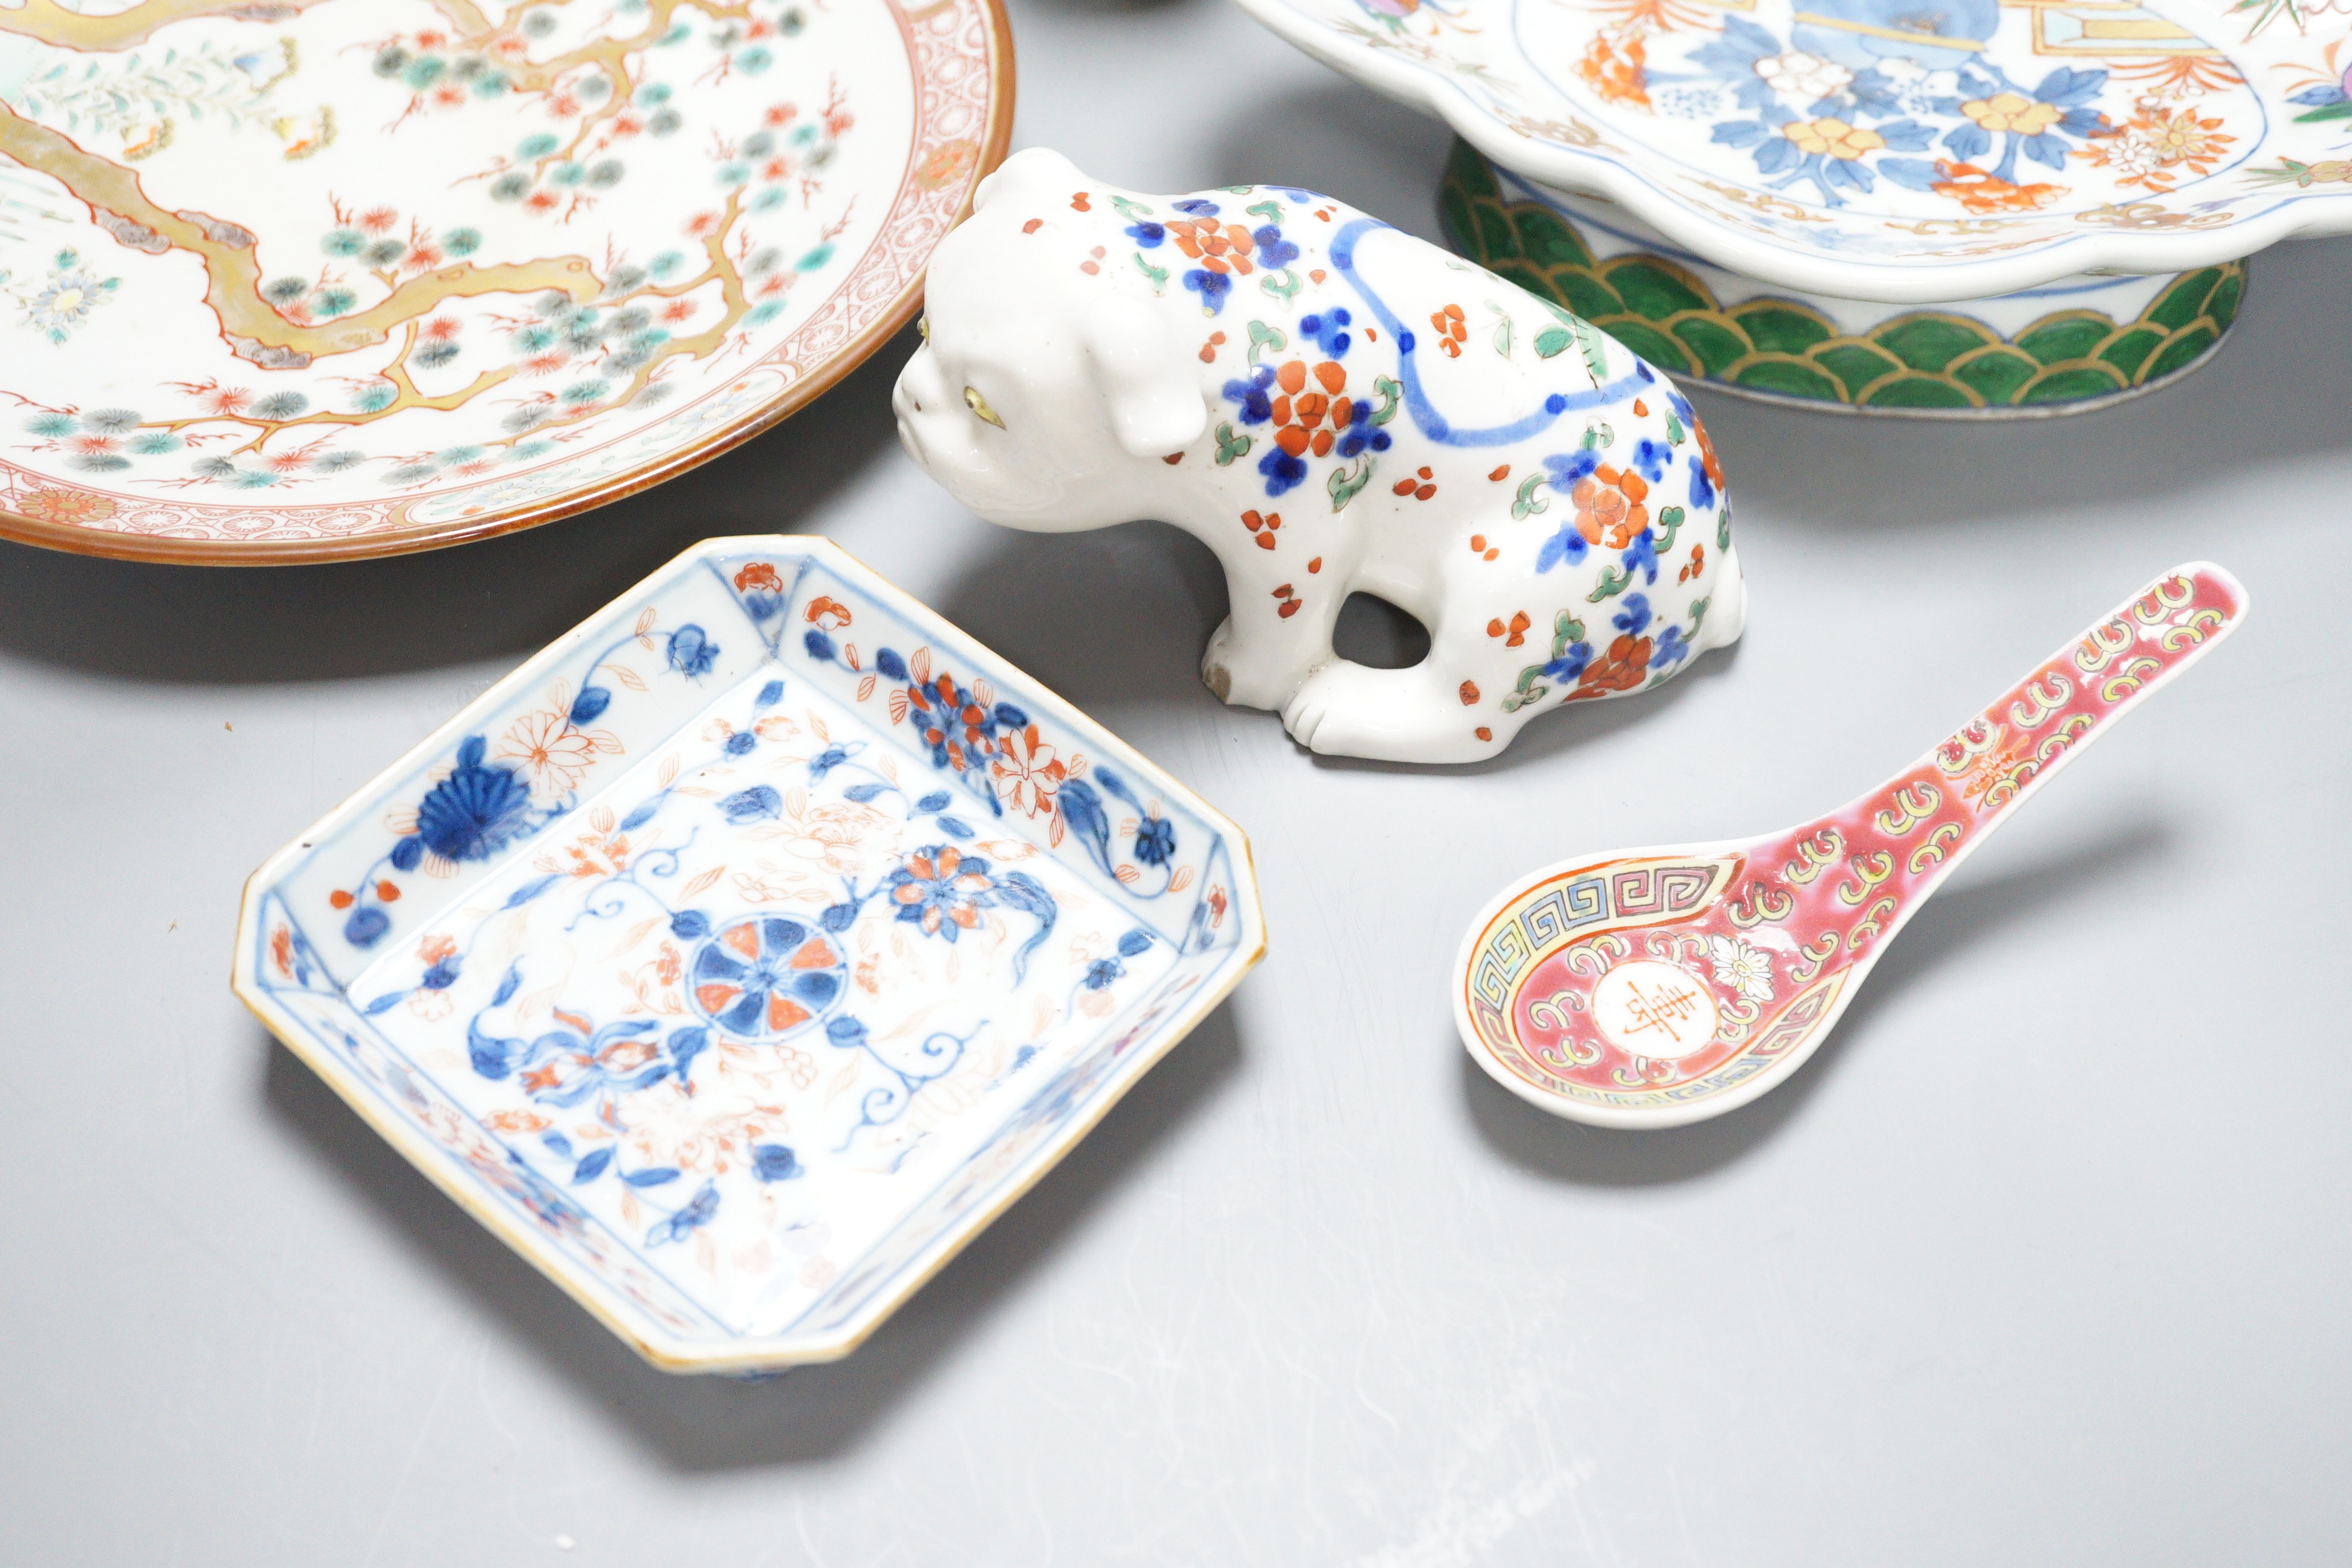 A group of Chinese and Japanese porcelain including an 18th century square Imari dish, a 19th century famille verte vase etc. (6)